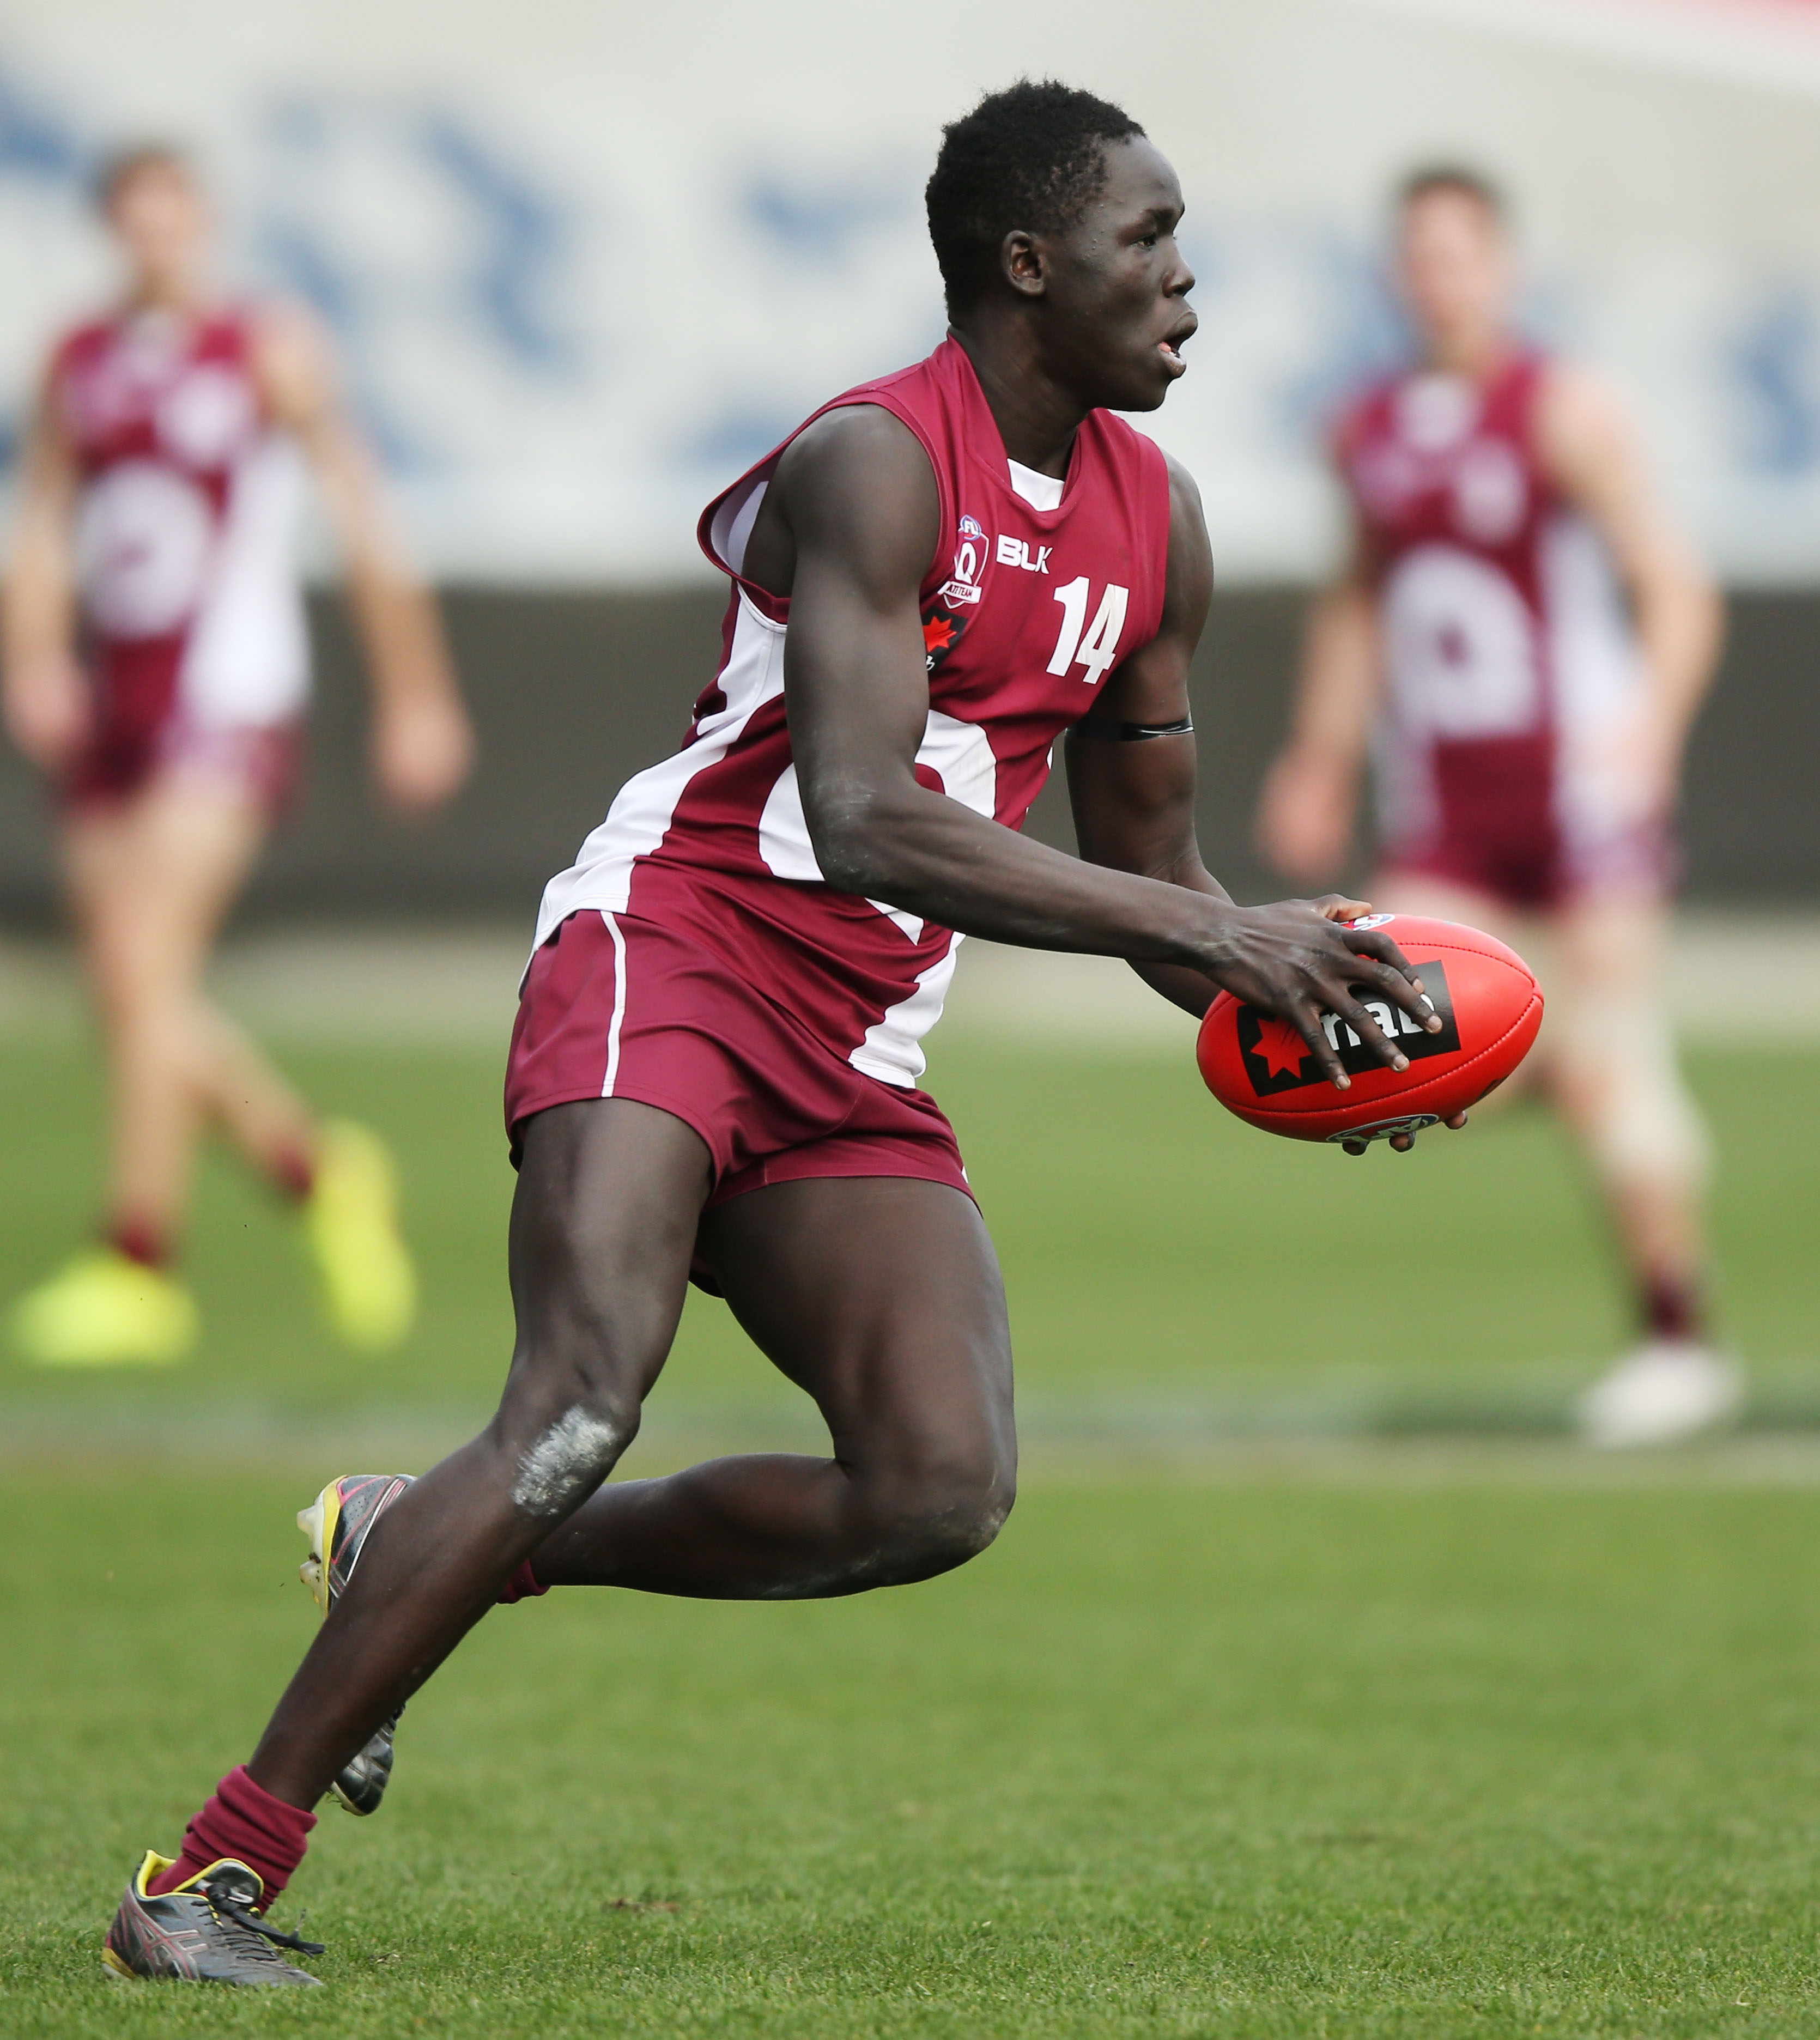 GEELONG, AUSTRALIA - JUNE 27: Reuben William of Queensland runs with the ball during the 2015 AFL Under 18 match between Queensland and Tasmania at Simonds Stadium, Geelong on June 27, 2015. (Photo by Michael Dodge/AFL Media)